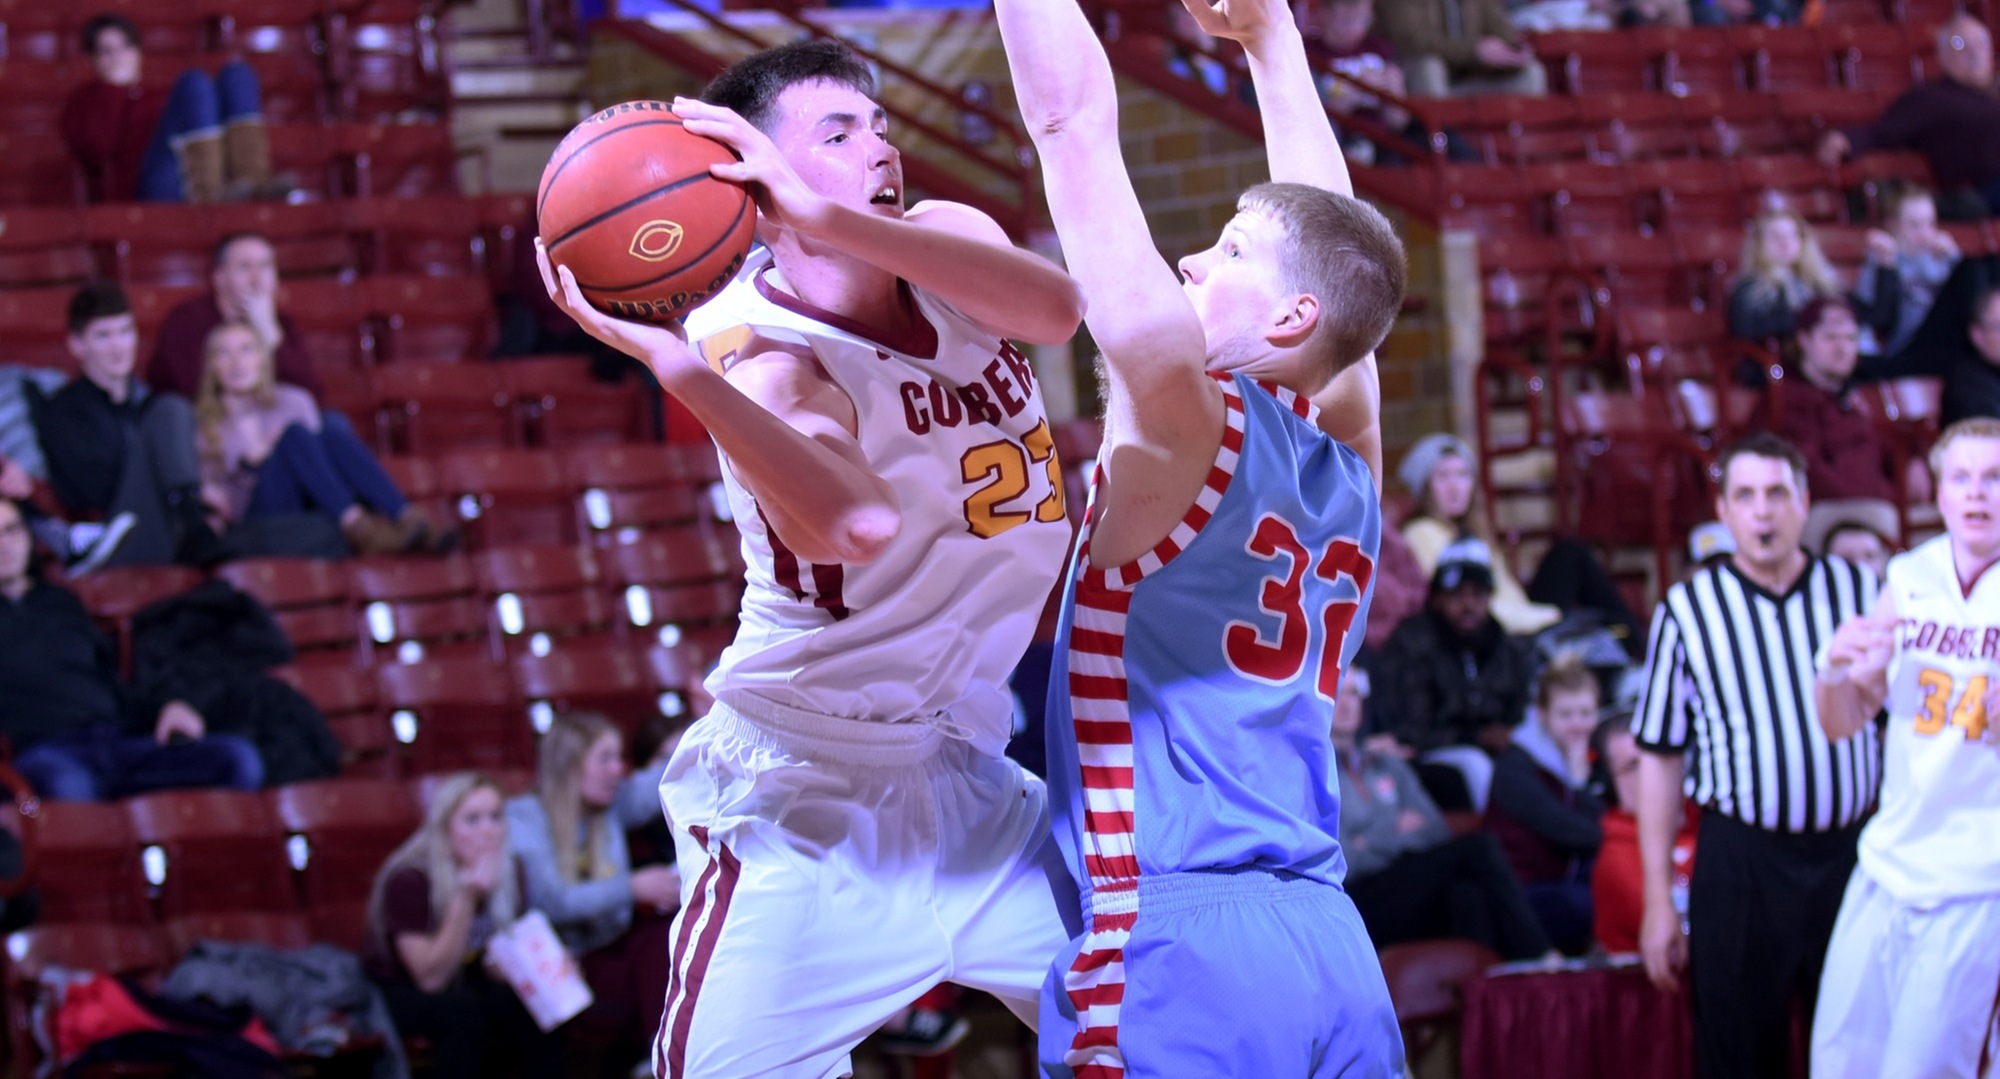 Senior Jordan Davis drives around a St. John's player and looks to make a pass during the first half of the Cobbers' game with the Johnnies.